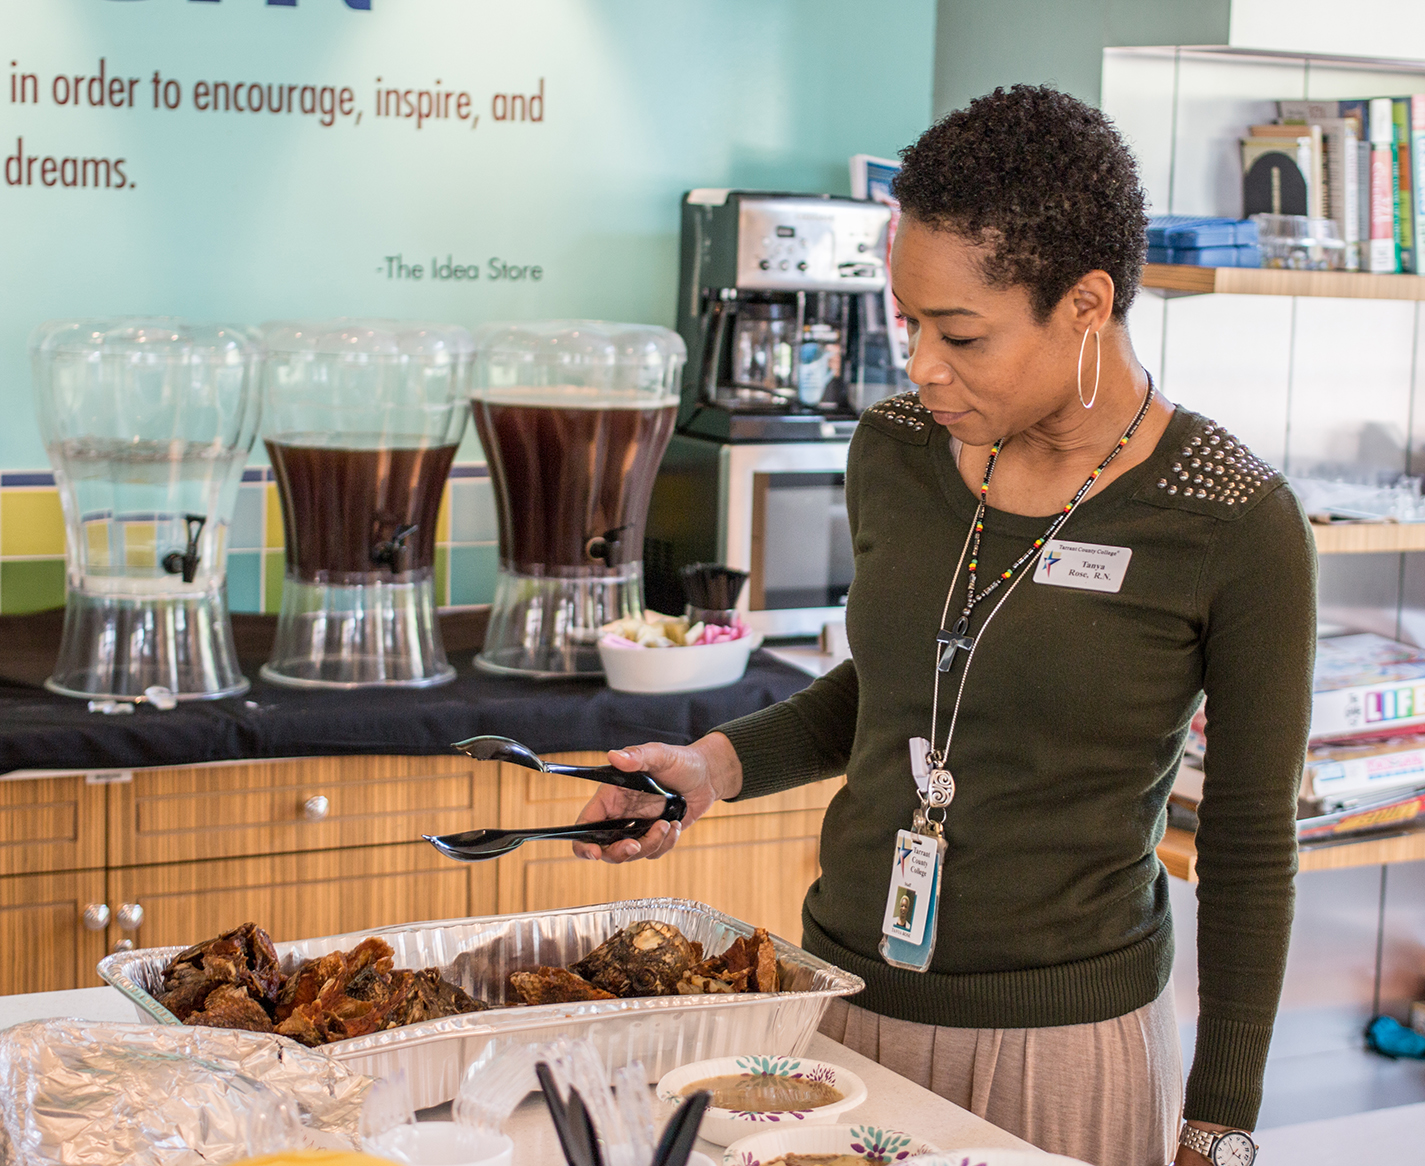 TR nursing assistant professor Tanya Rose picks up fried fish brought to the Multicultural Potluck Lunch in TR’s Idea Store April 4. Students, faculty and staff were encouraged to bring dishes from their culture.